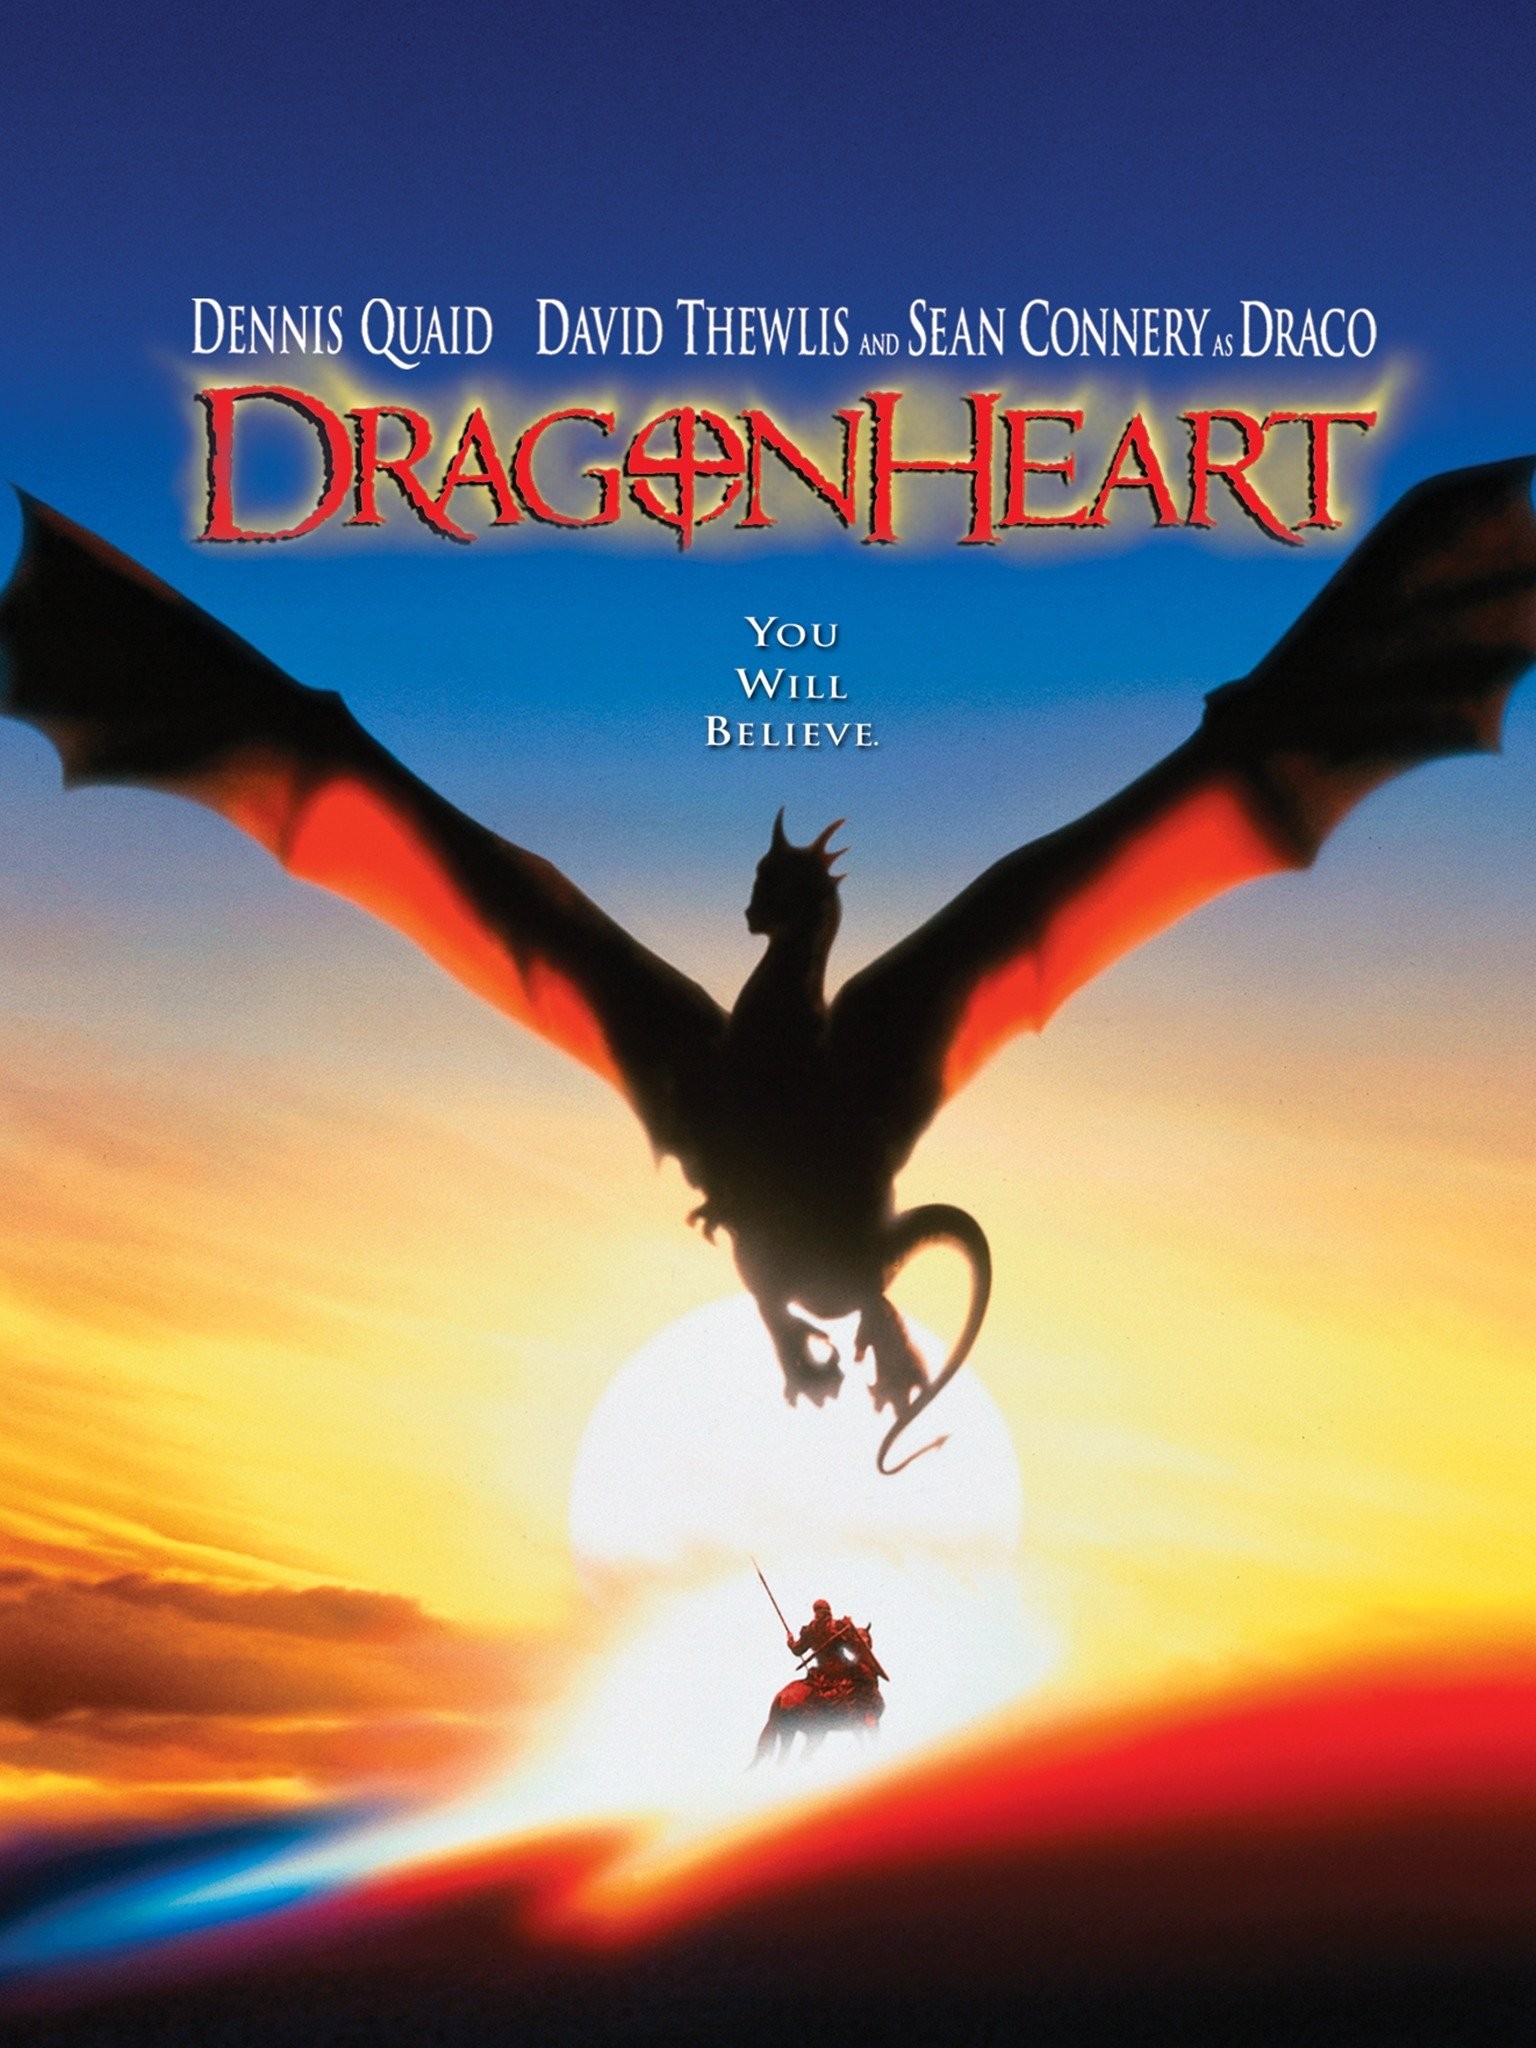 Dragonheart 3: The Sorcerer's Curse Pictures | Rotten Tomatoes